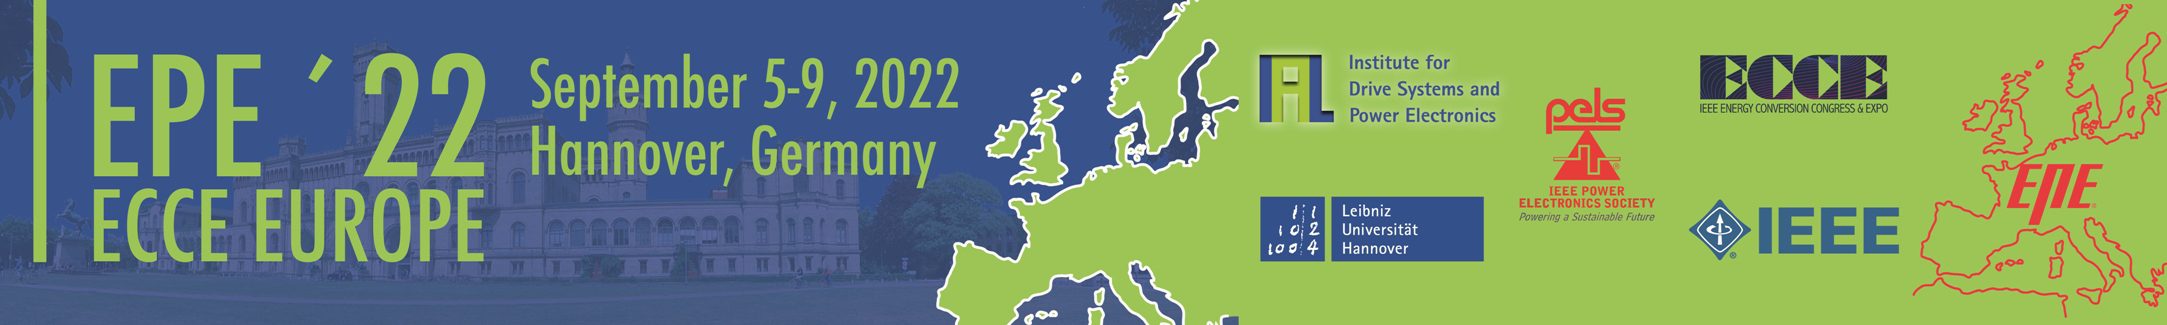 EPE'22 ECCE Europe | 24th European Conference on Power Electronics and Applications